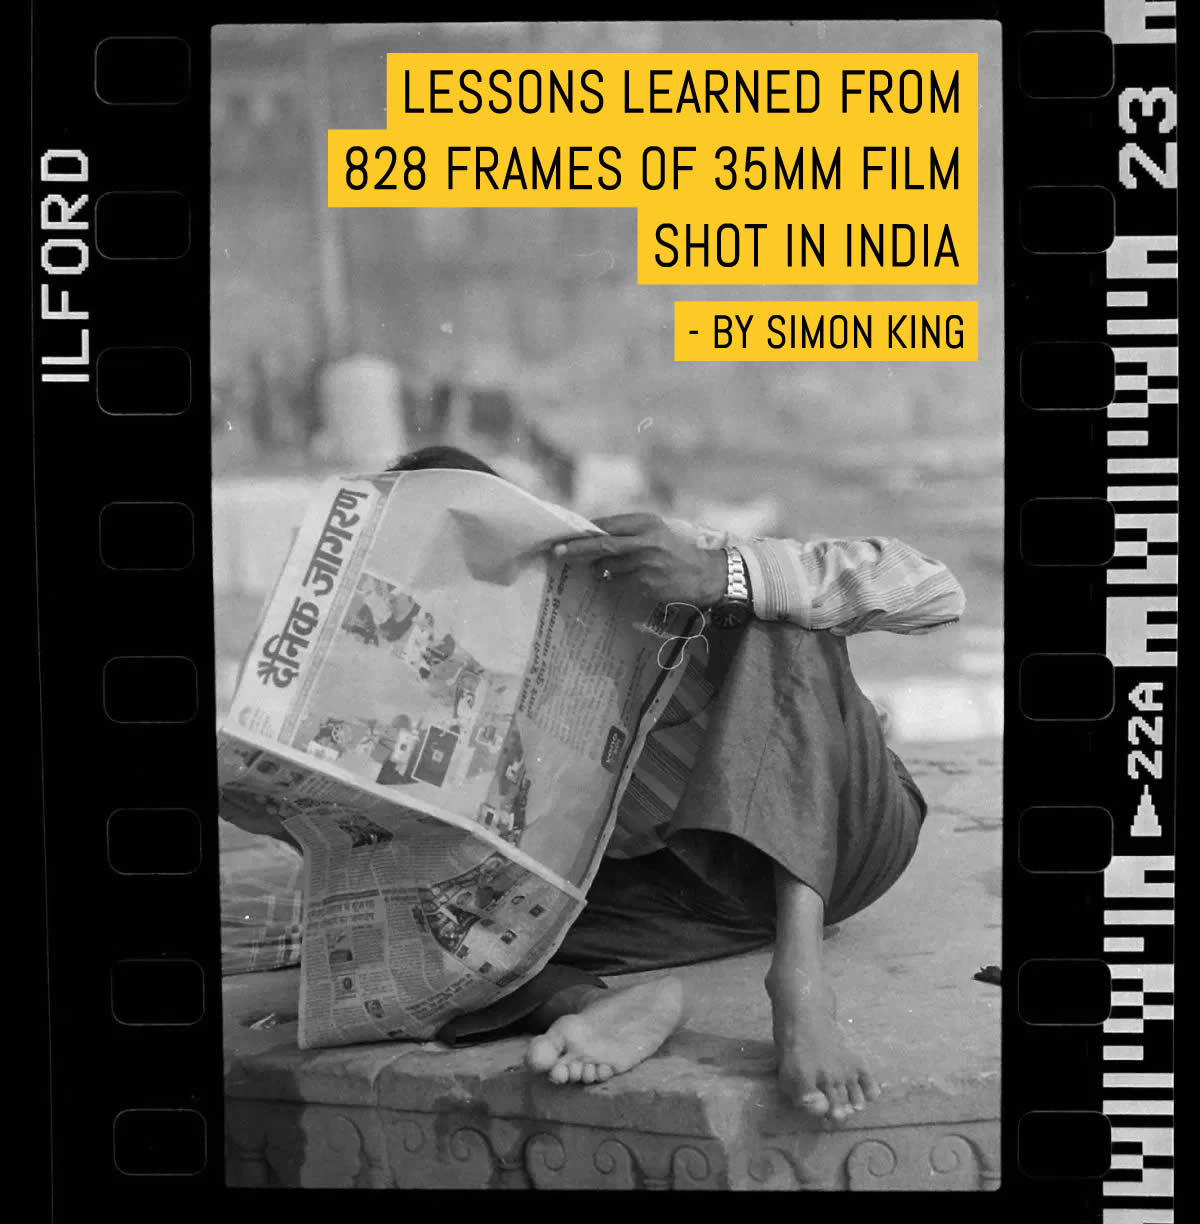 Lessons learned from 828 frames of 35mm film shot in India